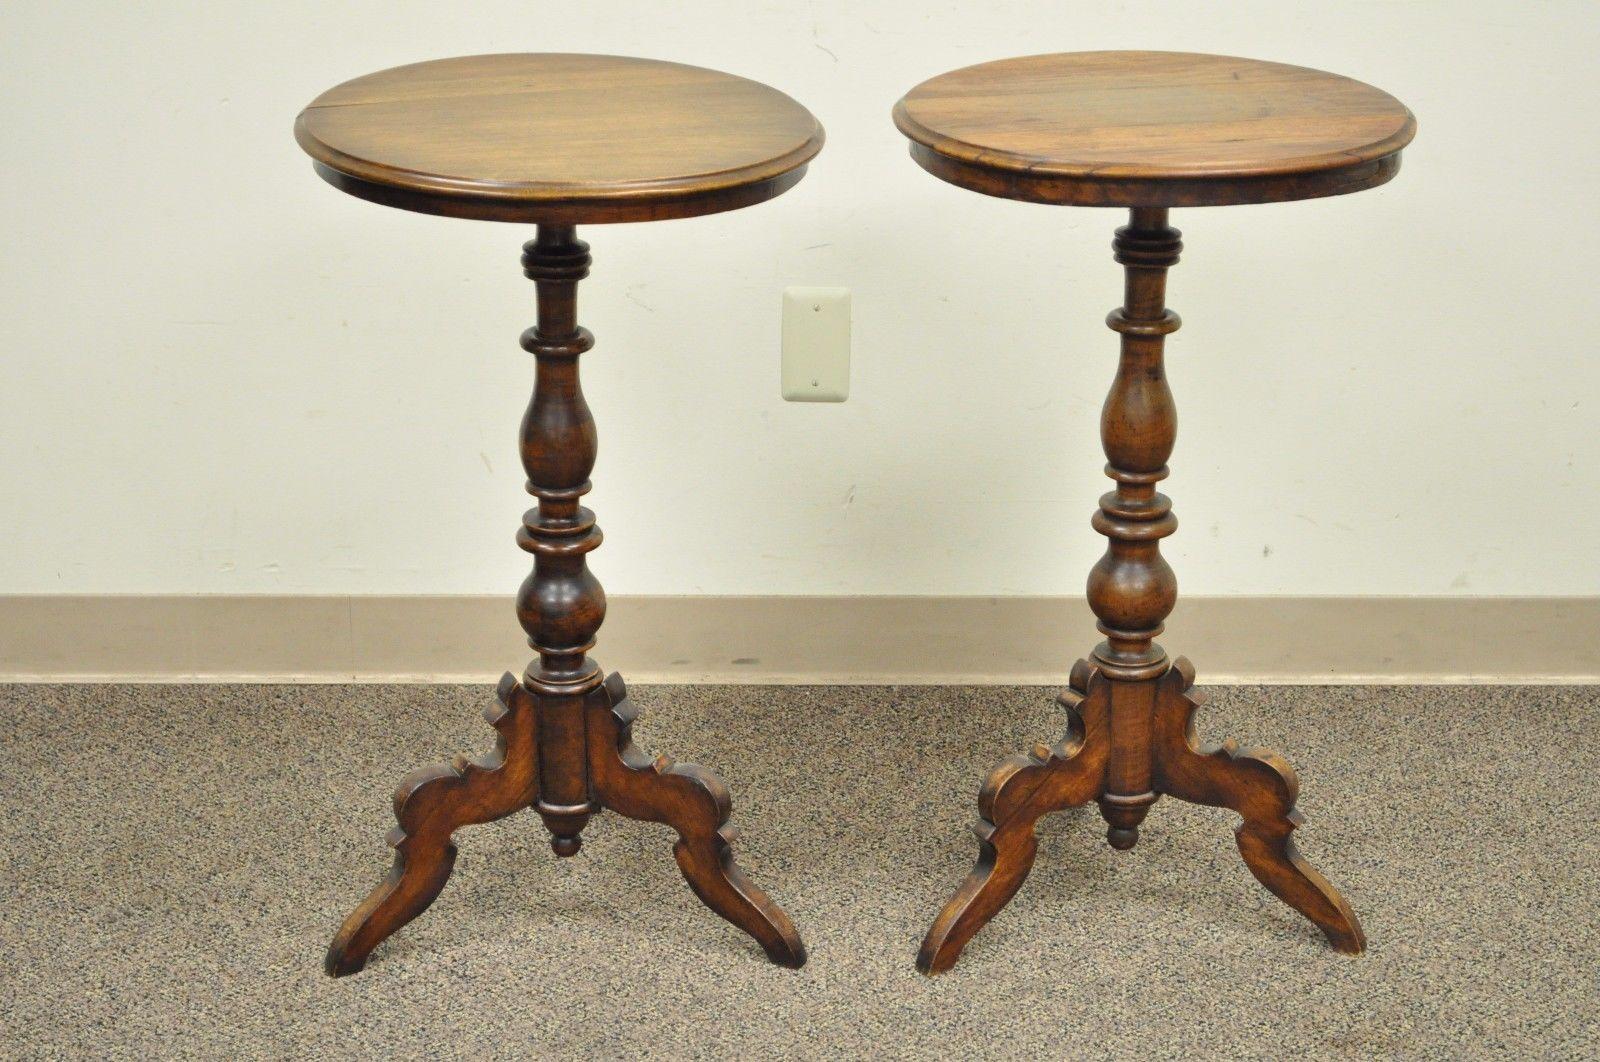 Pair of antique American Colonial round turn carved walnut handmade pedestal base side tables. Item features solid walnut construction, turned carved pedestal bases, tripod legs, old repairs which adds character. Great antique tables, circa 19th